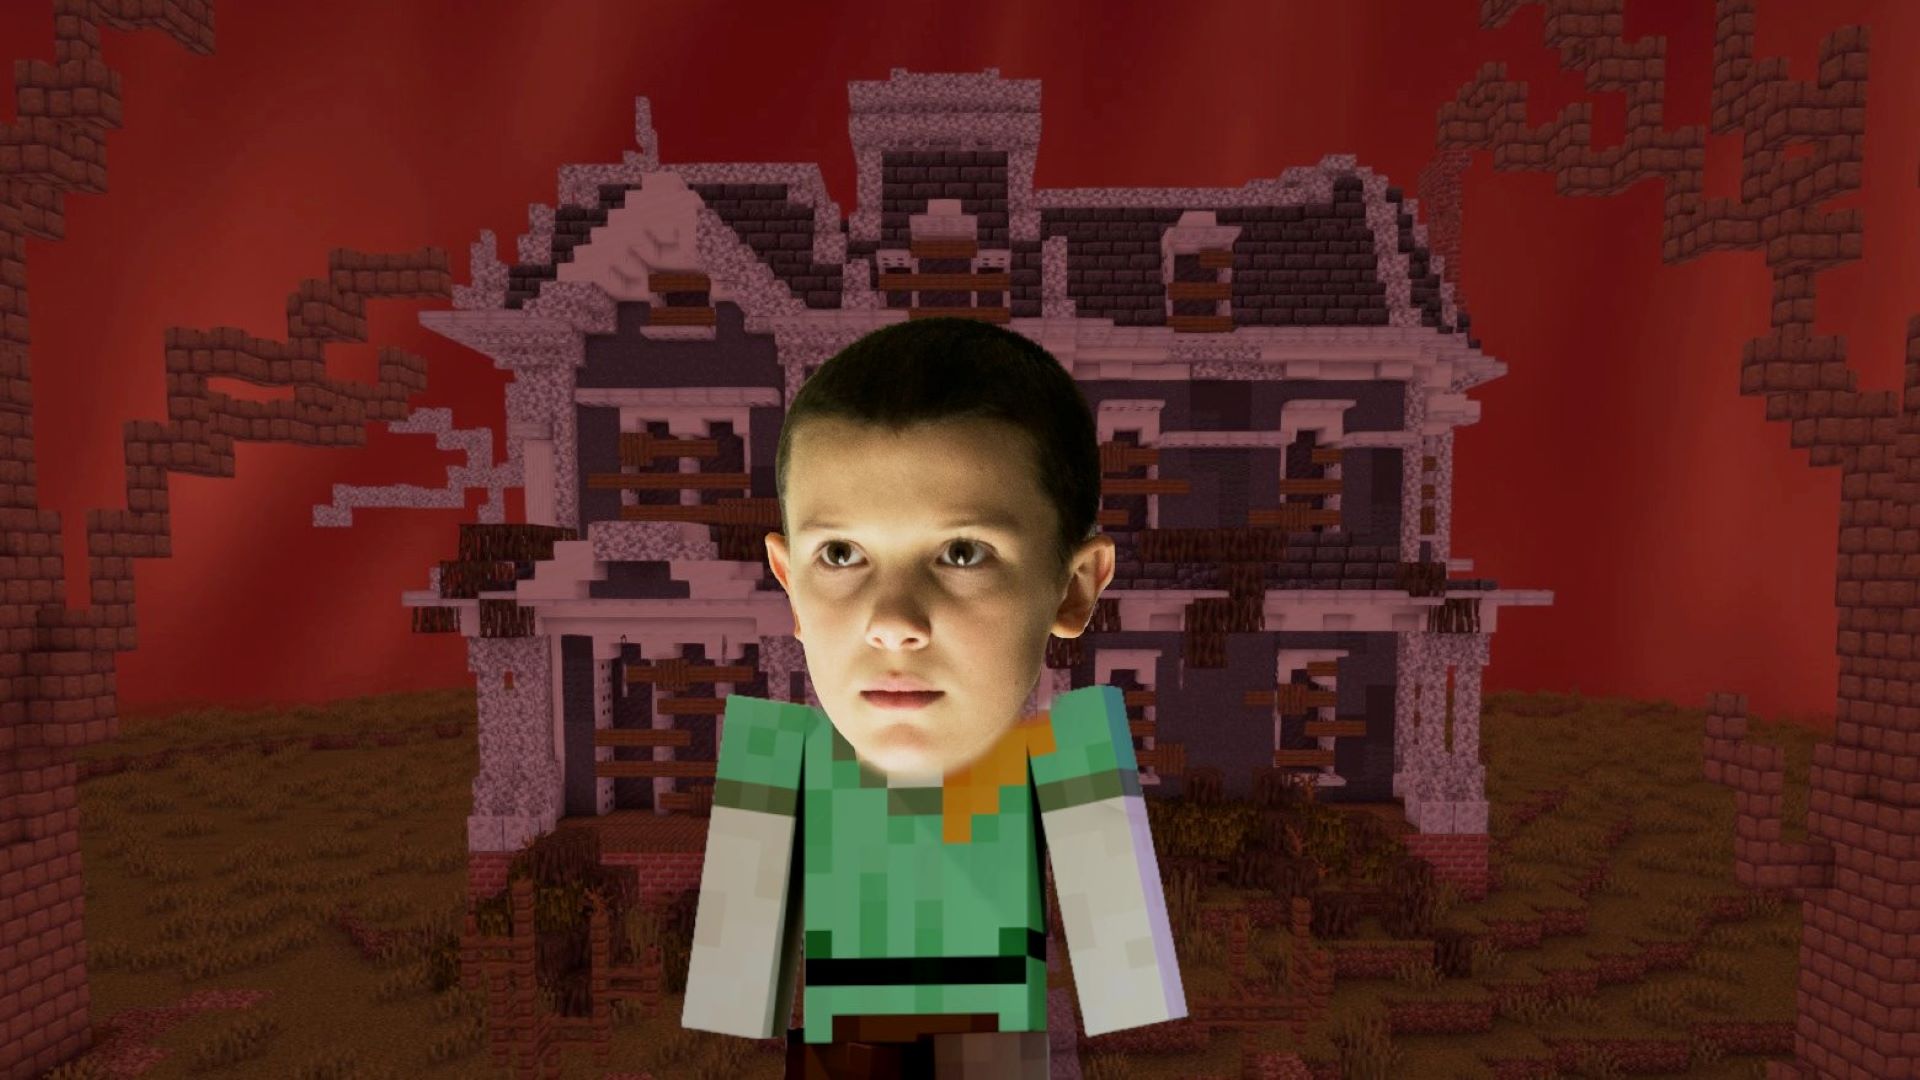 This Minecraft Stranger Things build is excellent